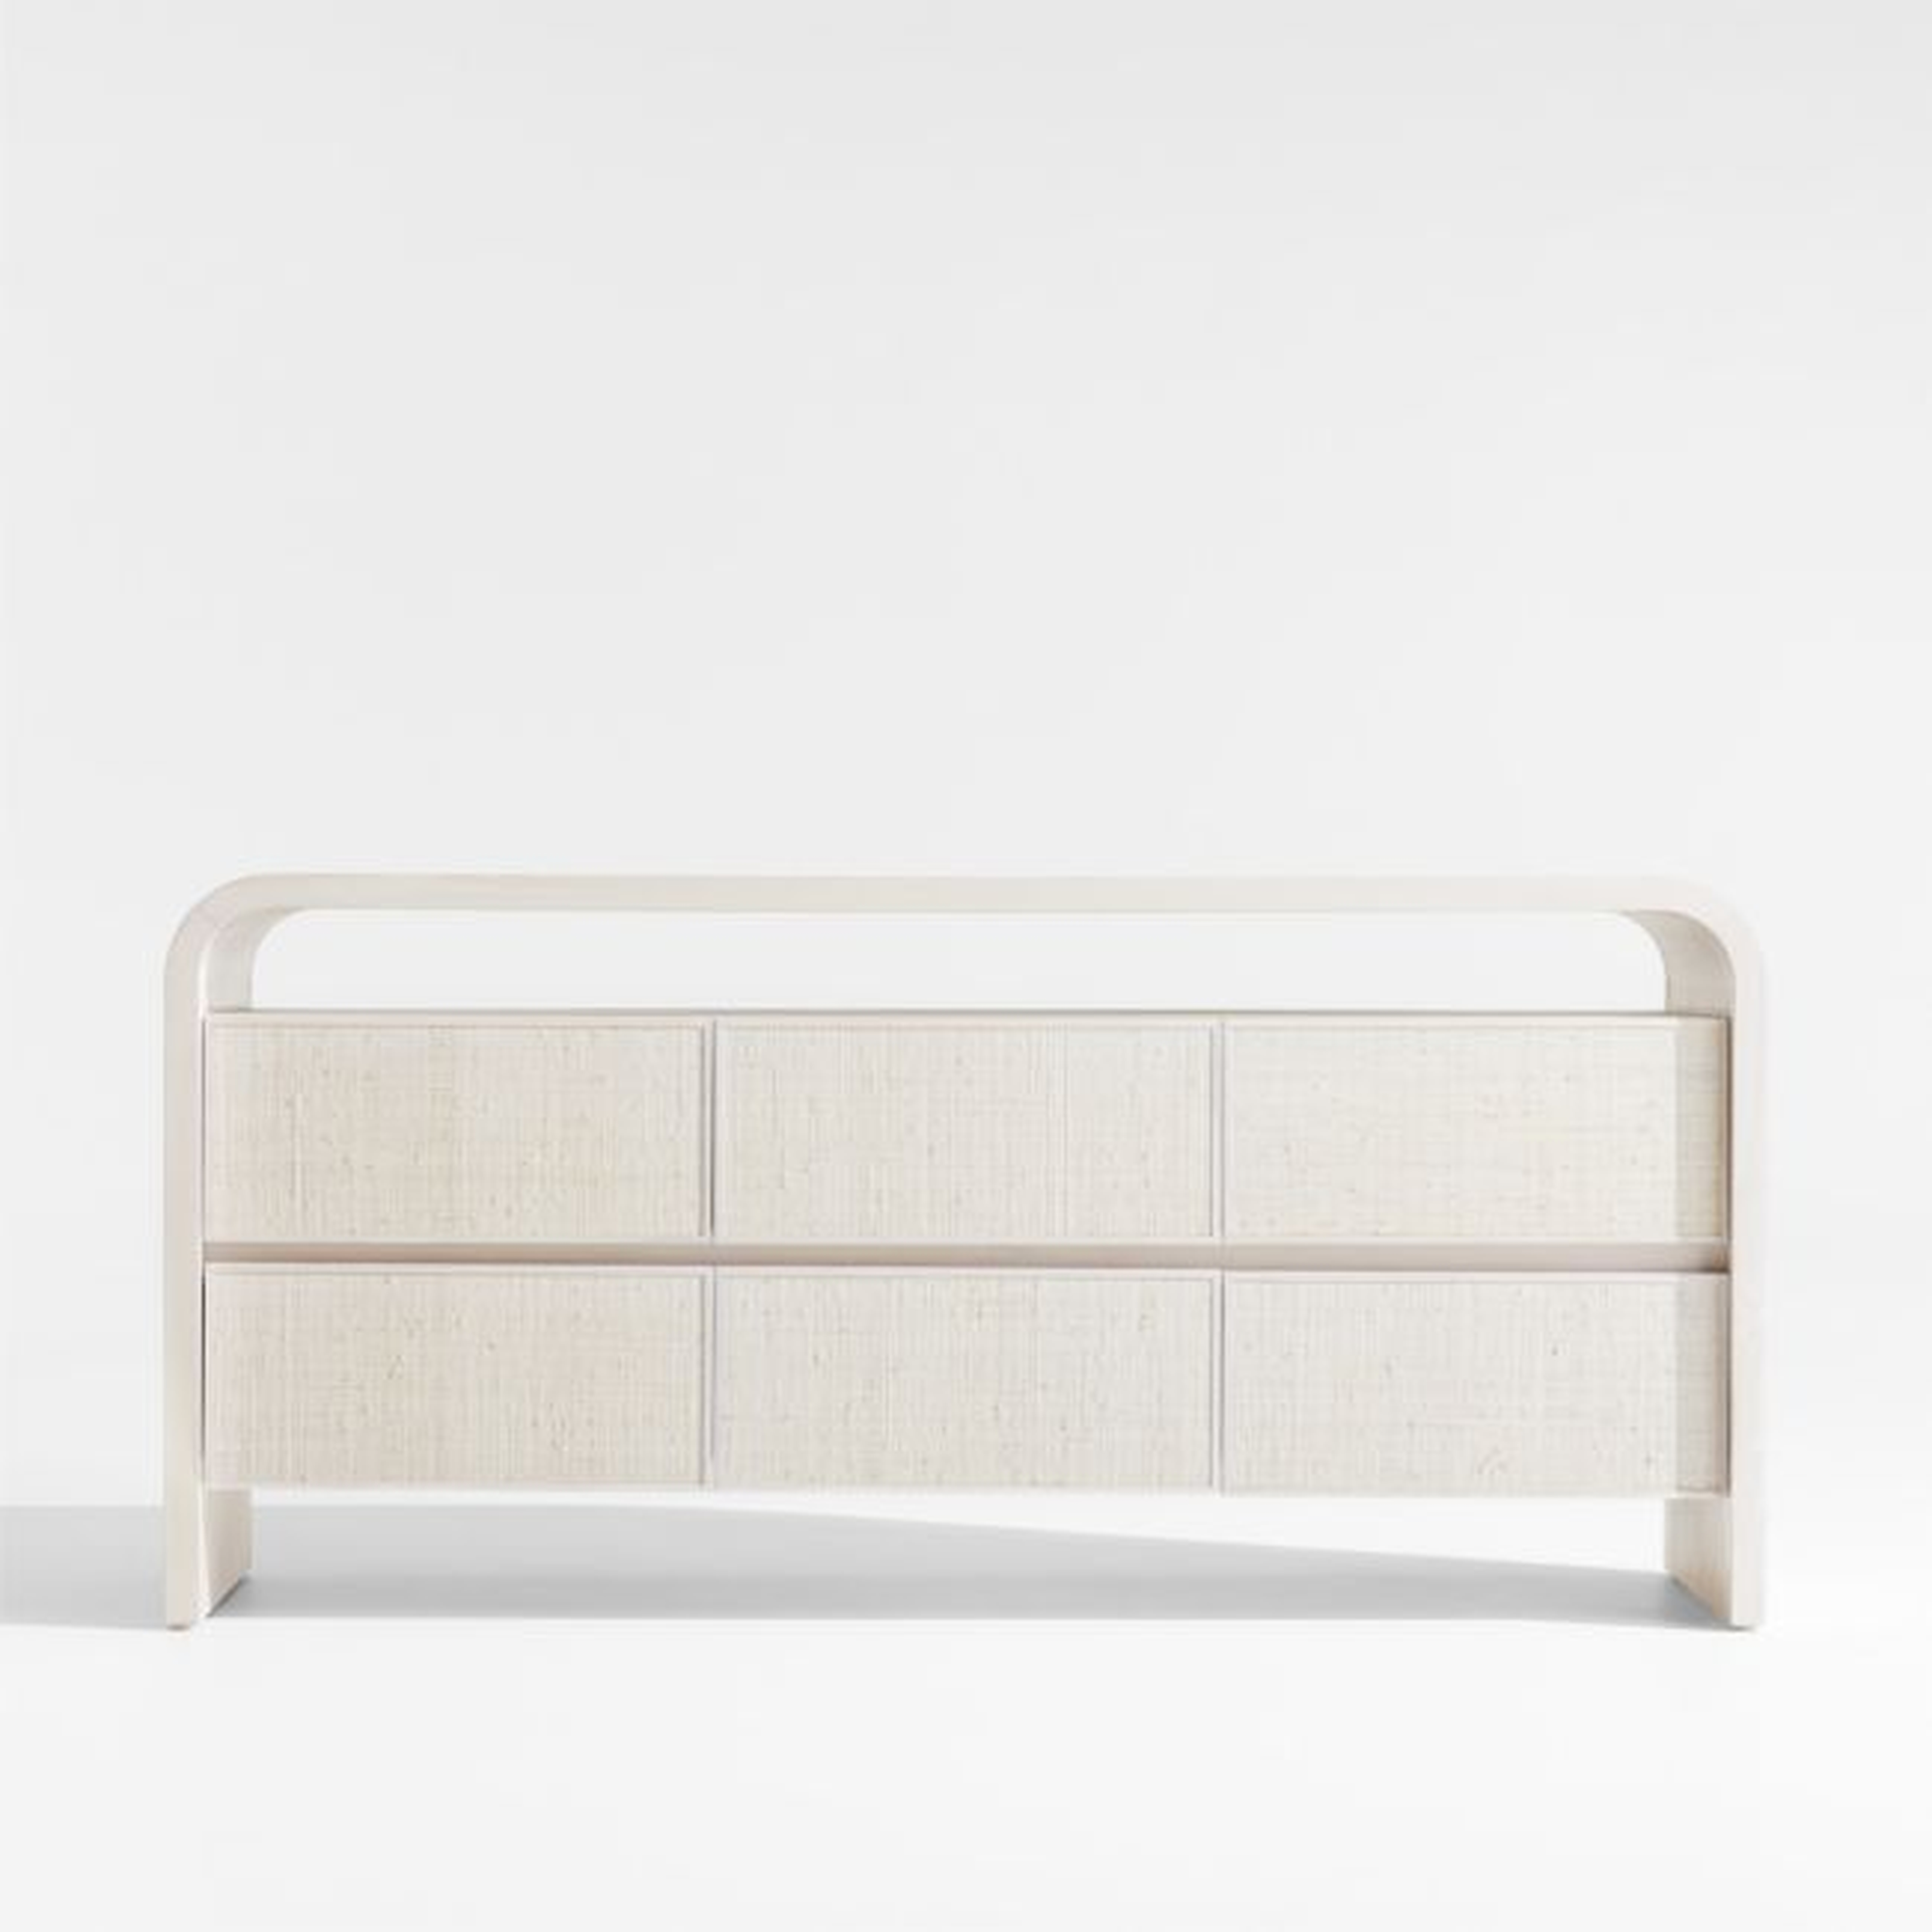 Rica Grasscloth 6-Drawer Dresser by Leanne Ford - Crate and Barrel